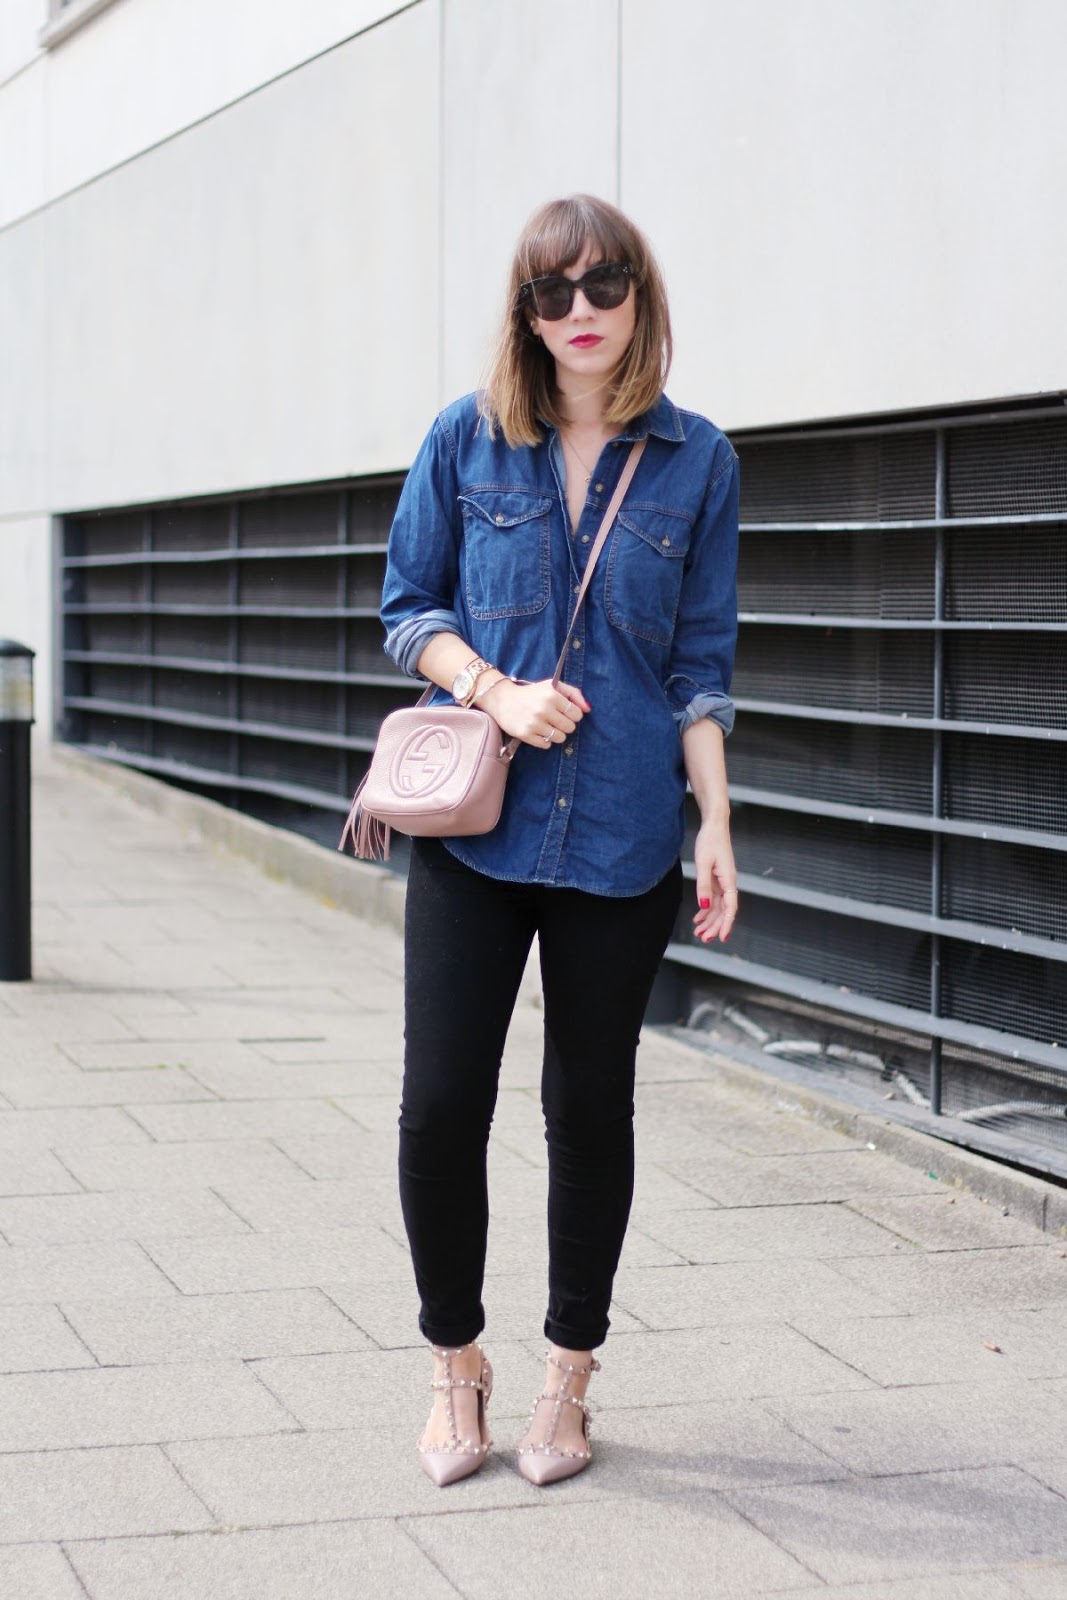 The Simple Denim Shirt - The Lovecats Inc